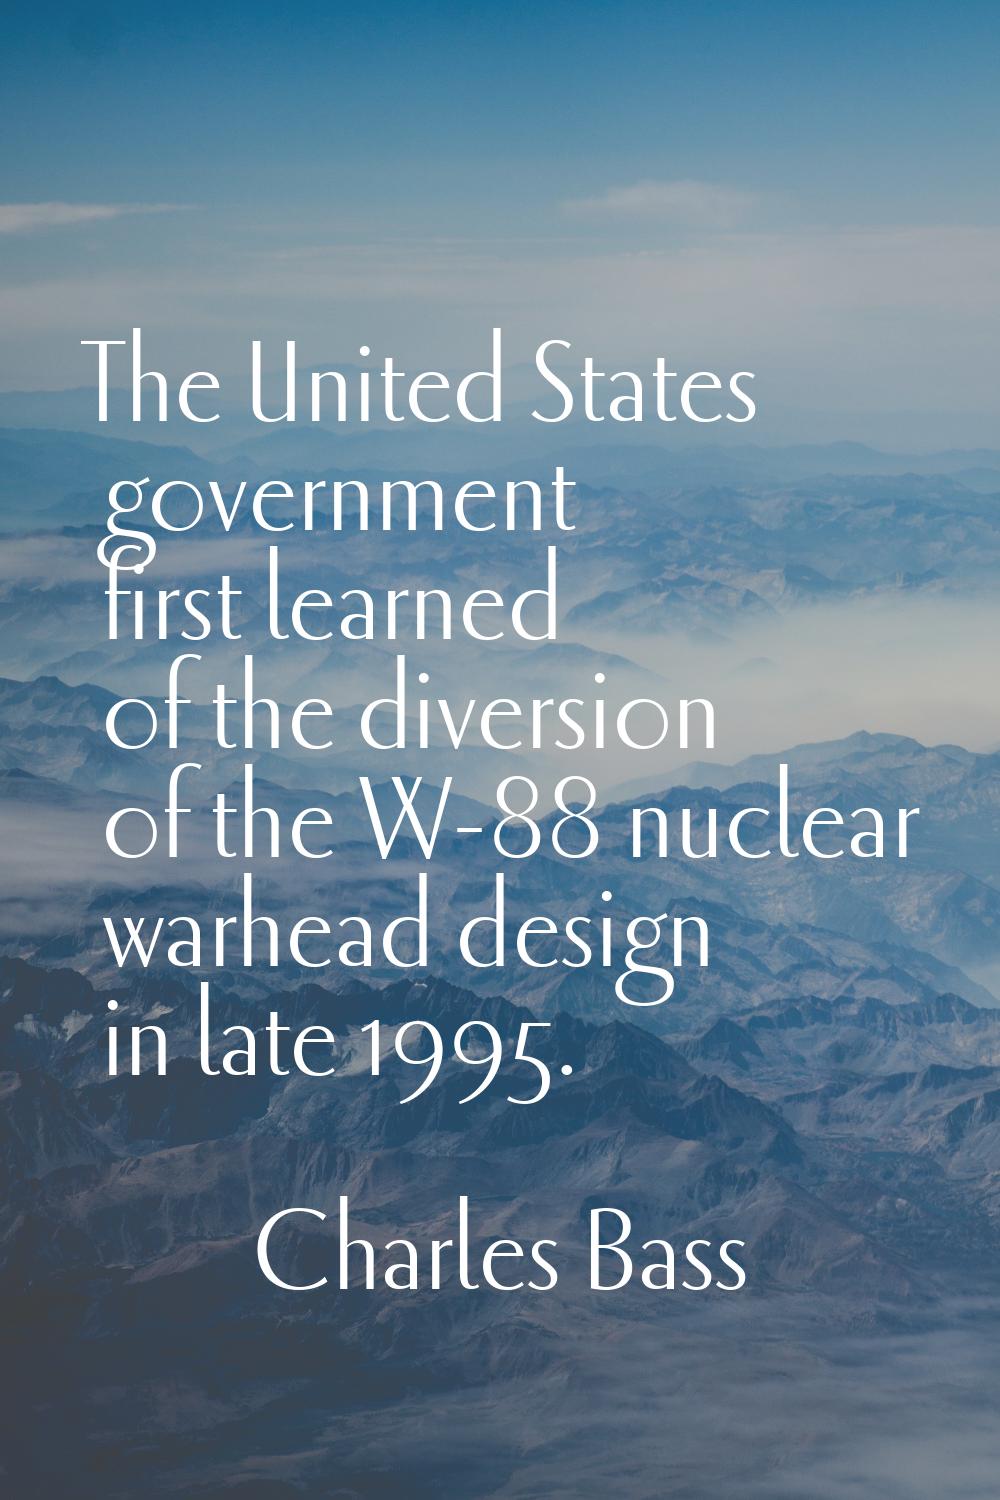 The United States government first learned of the diversion of the W-88 nuclear warhead design in l